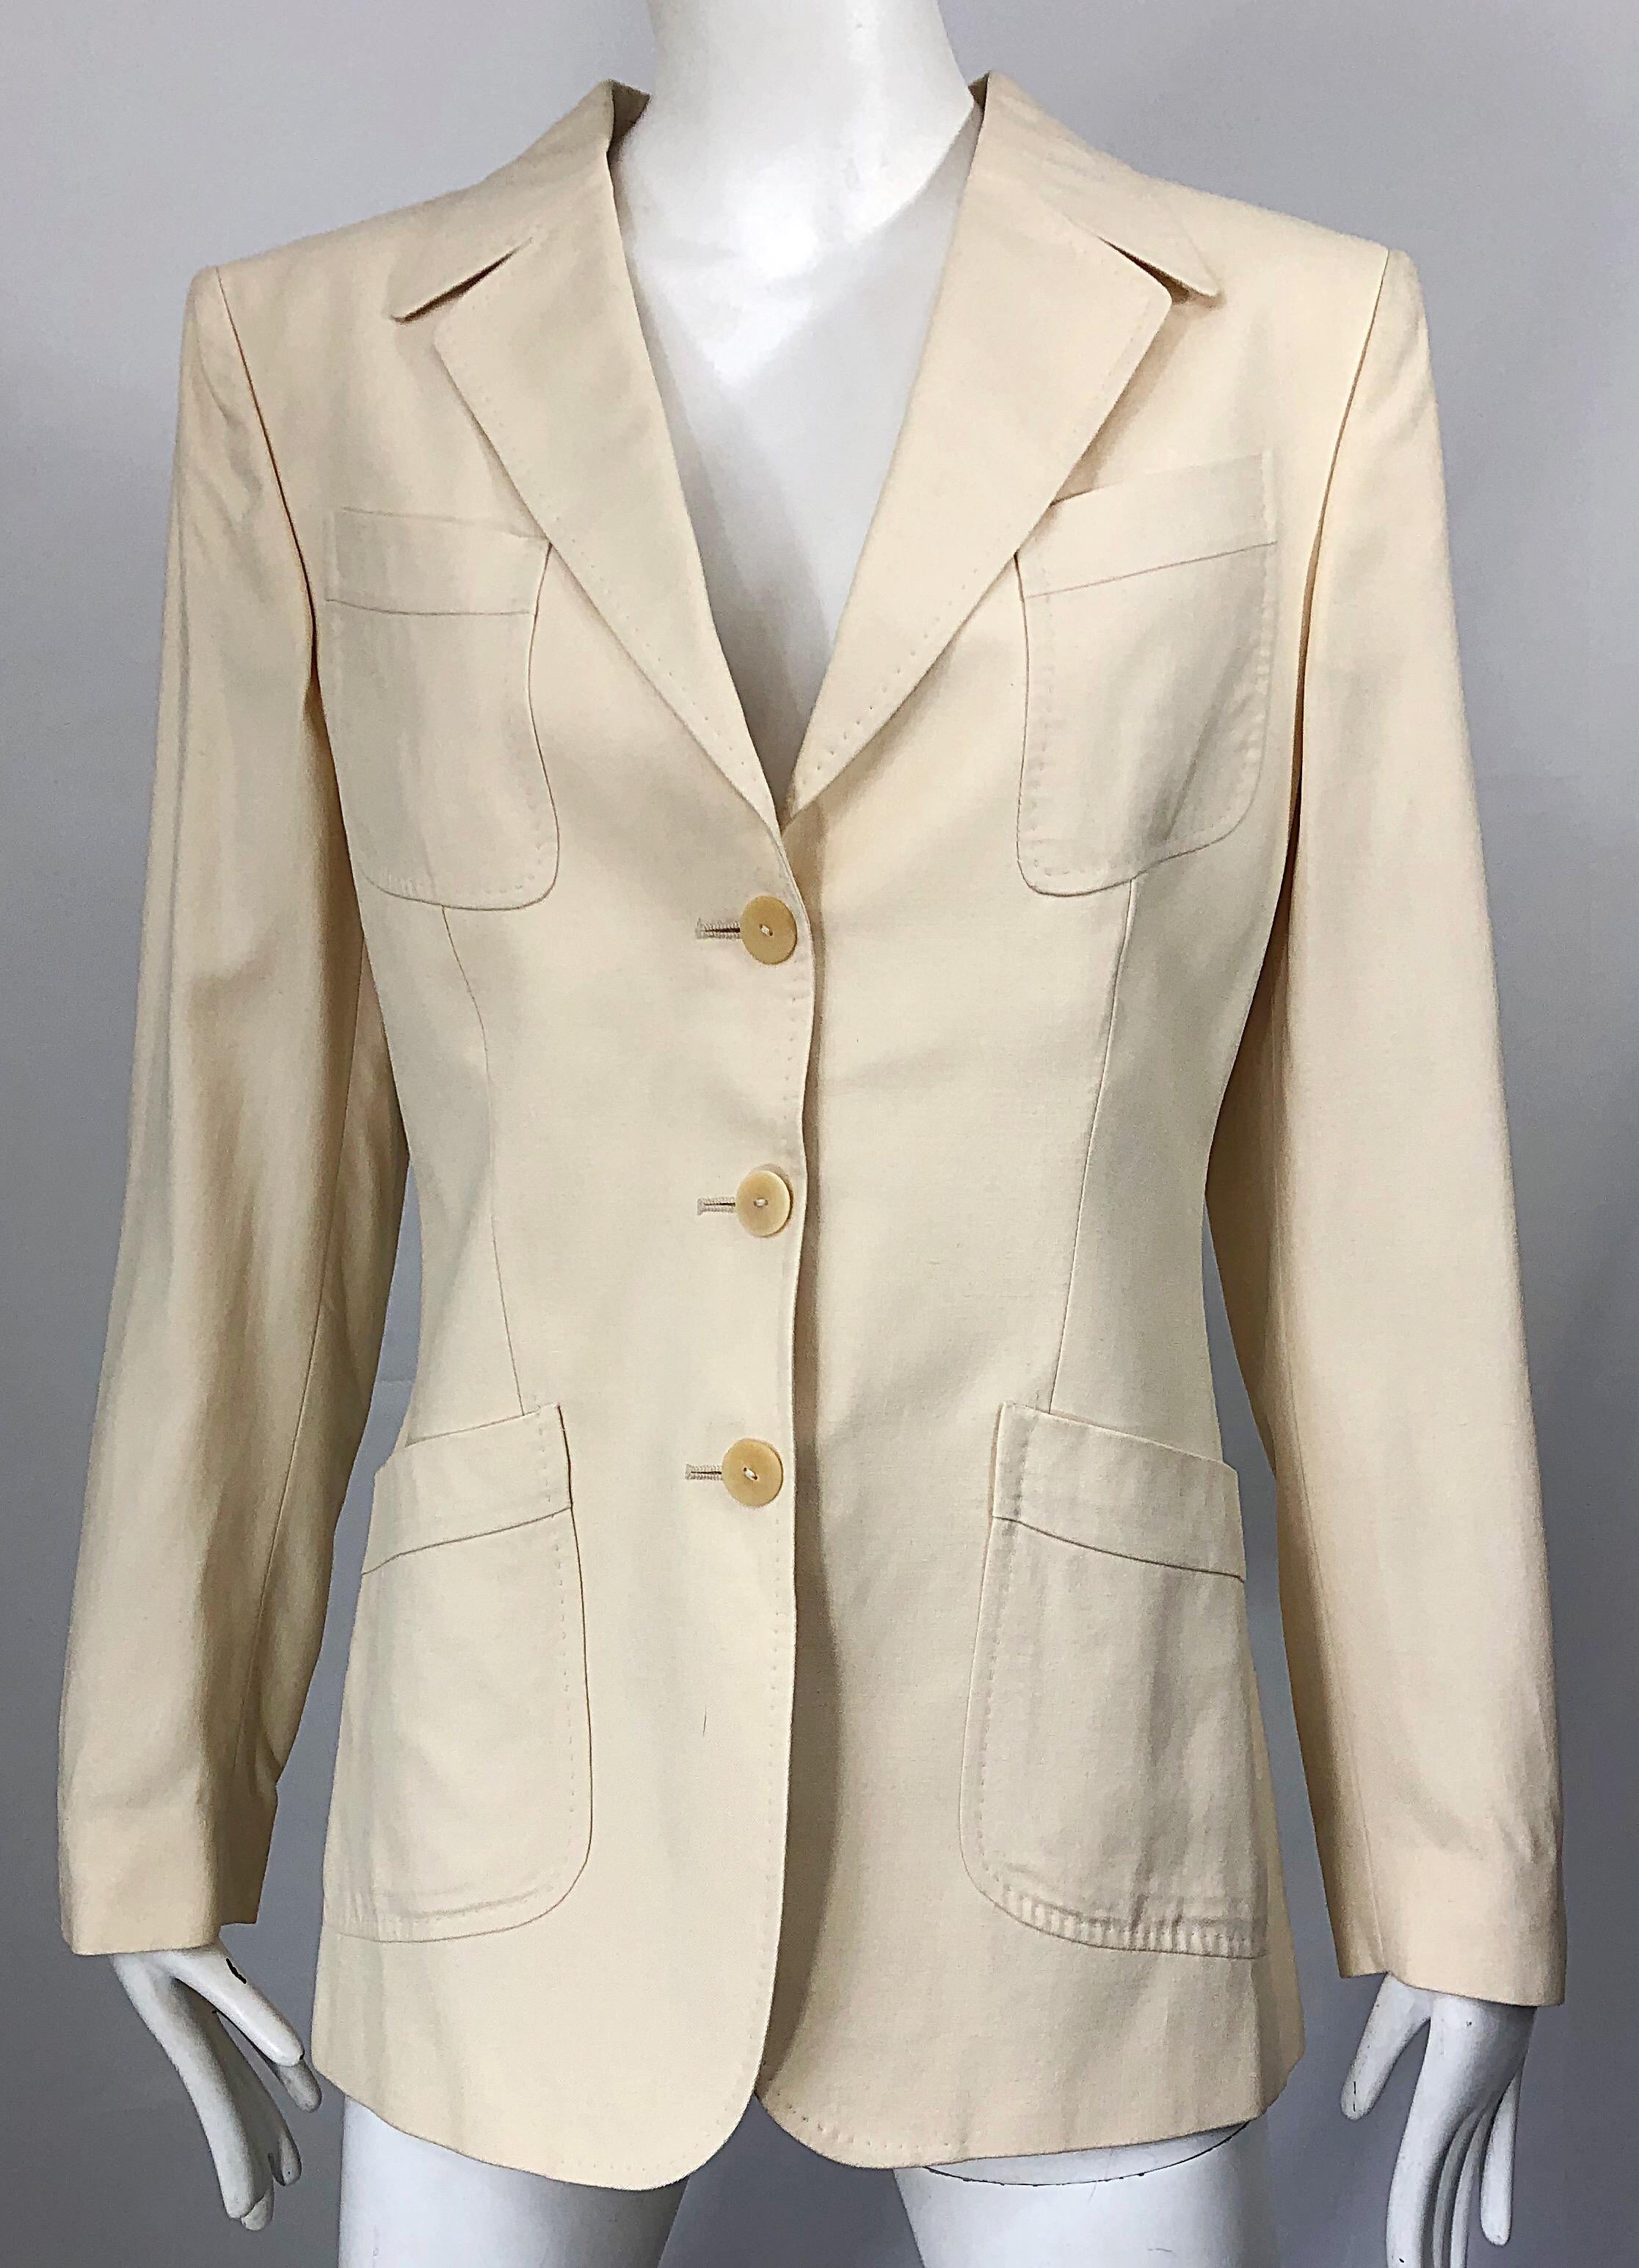 Vintage Thierry Mugler Couture 1990s Size 40 / US 8 Ivory Silk 90s Blazer Jacket For Sale 1